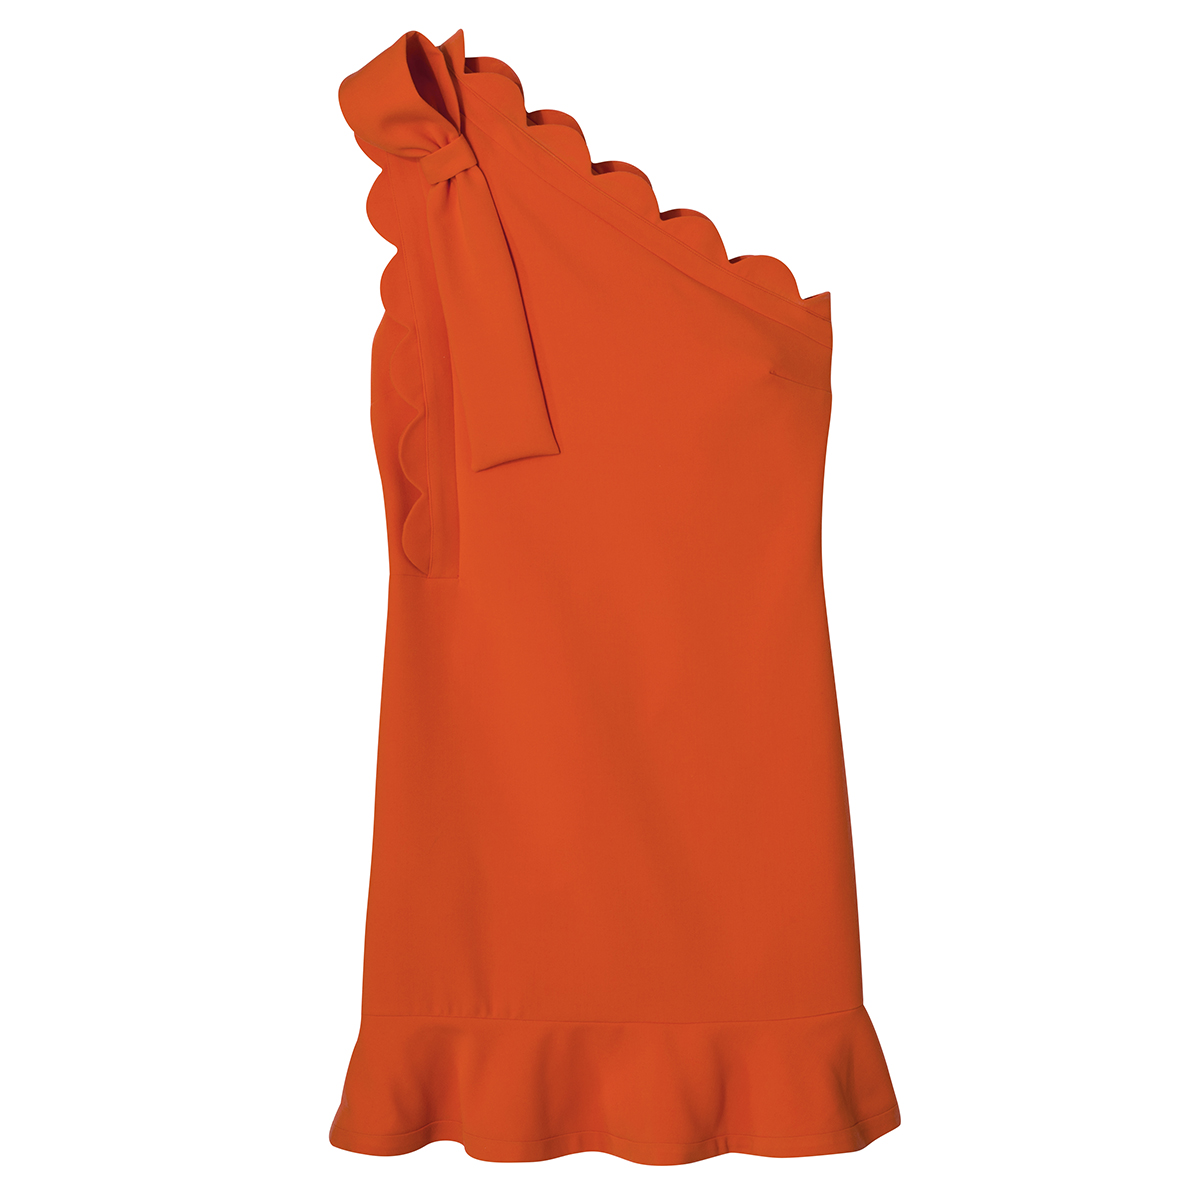 Orange One-Shoulder Dress with Bow and Scallop Trim, $40